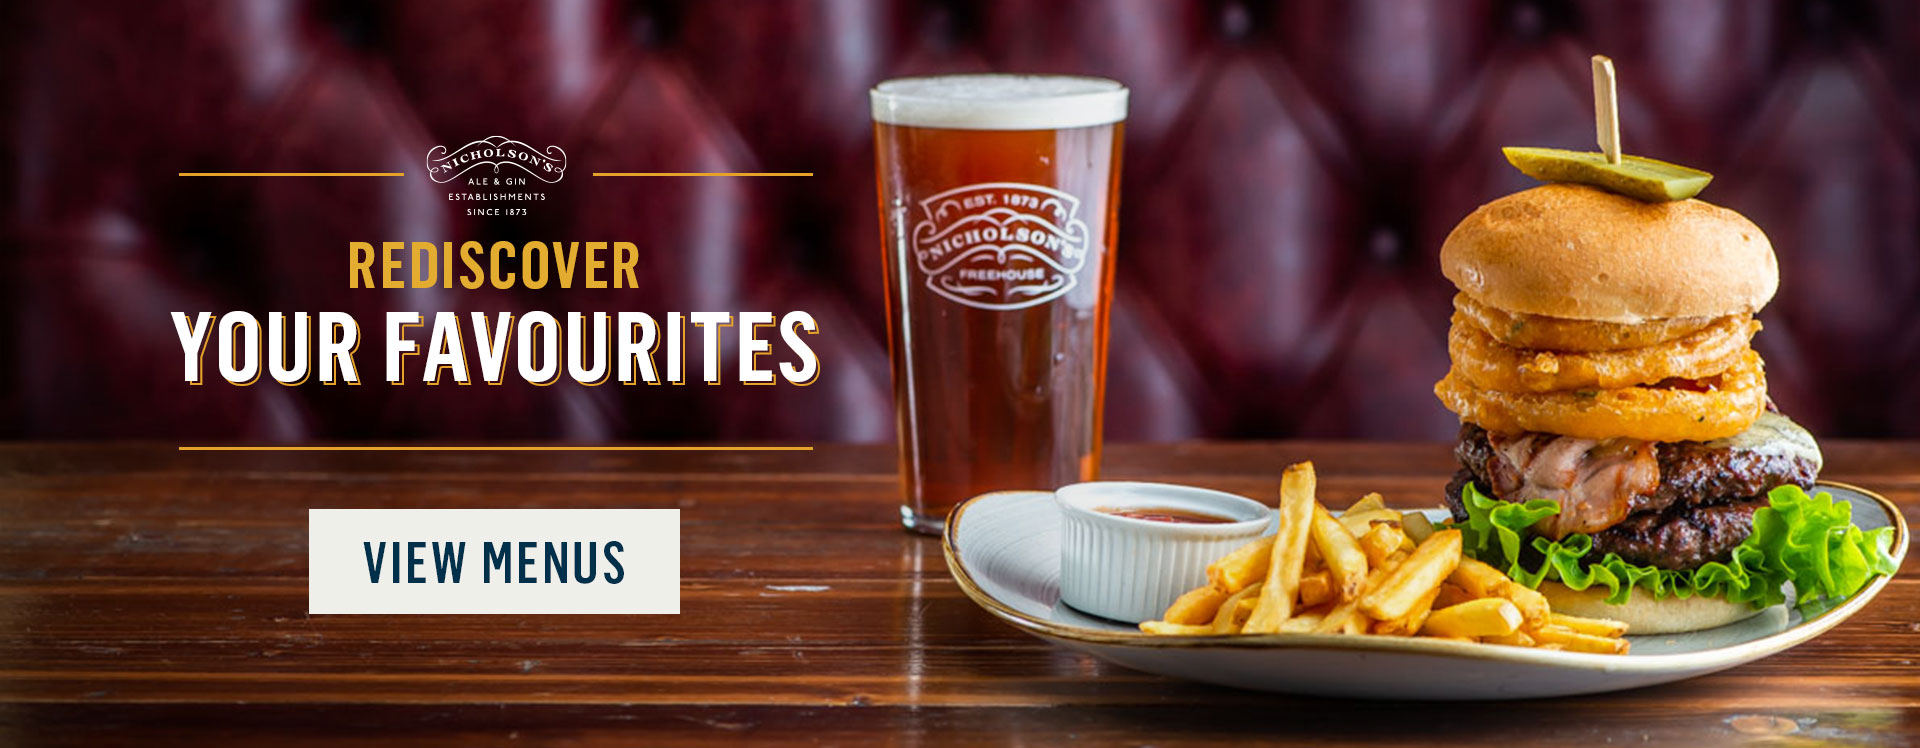 Rediscover your favourites at The Carpenter's Arms